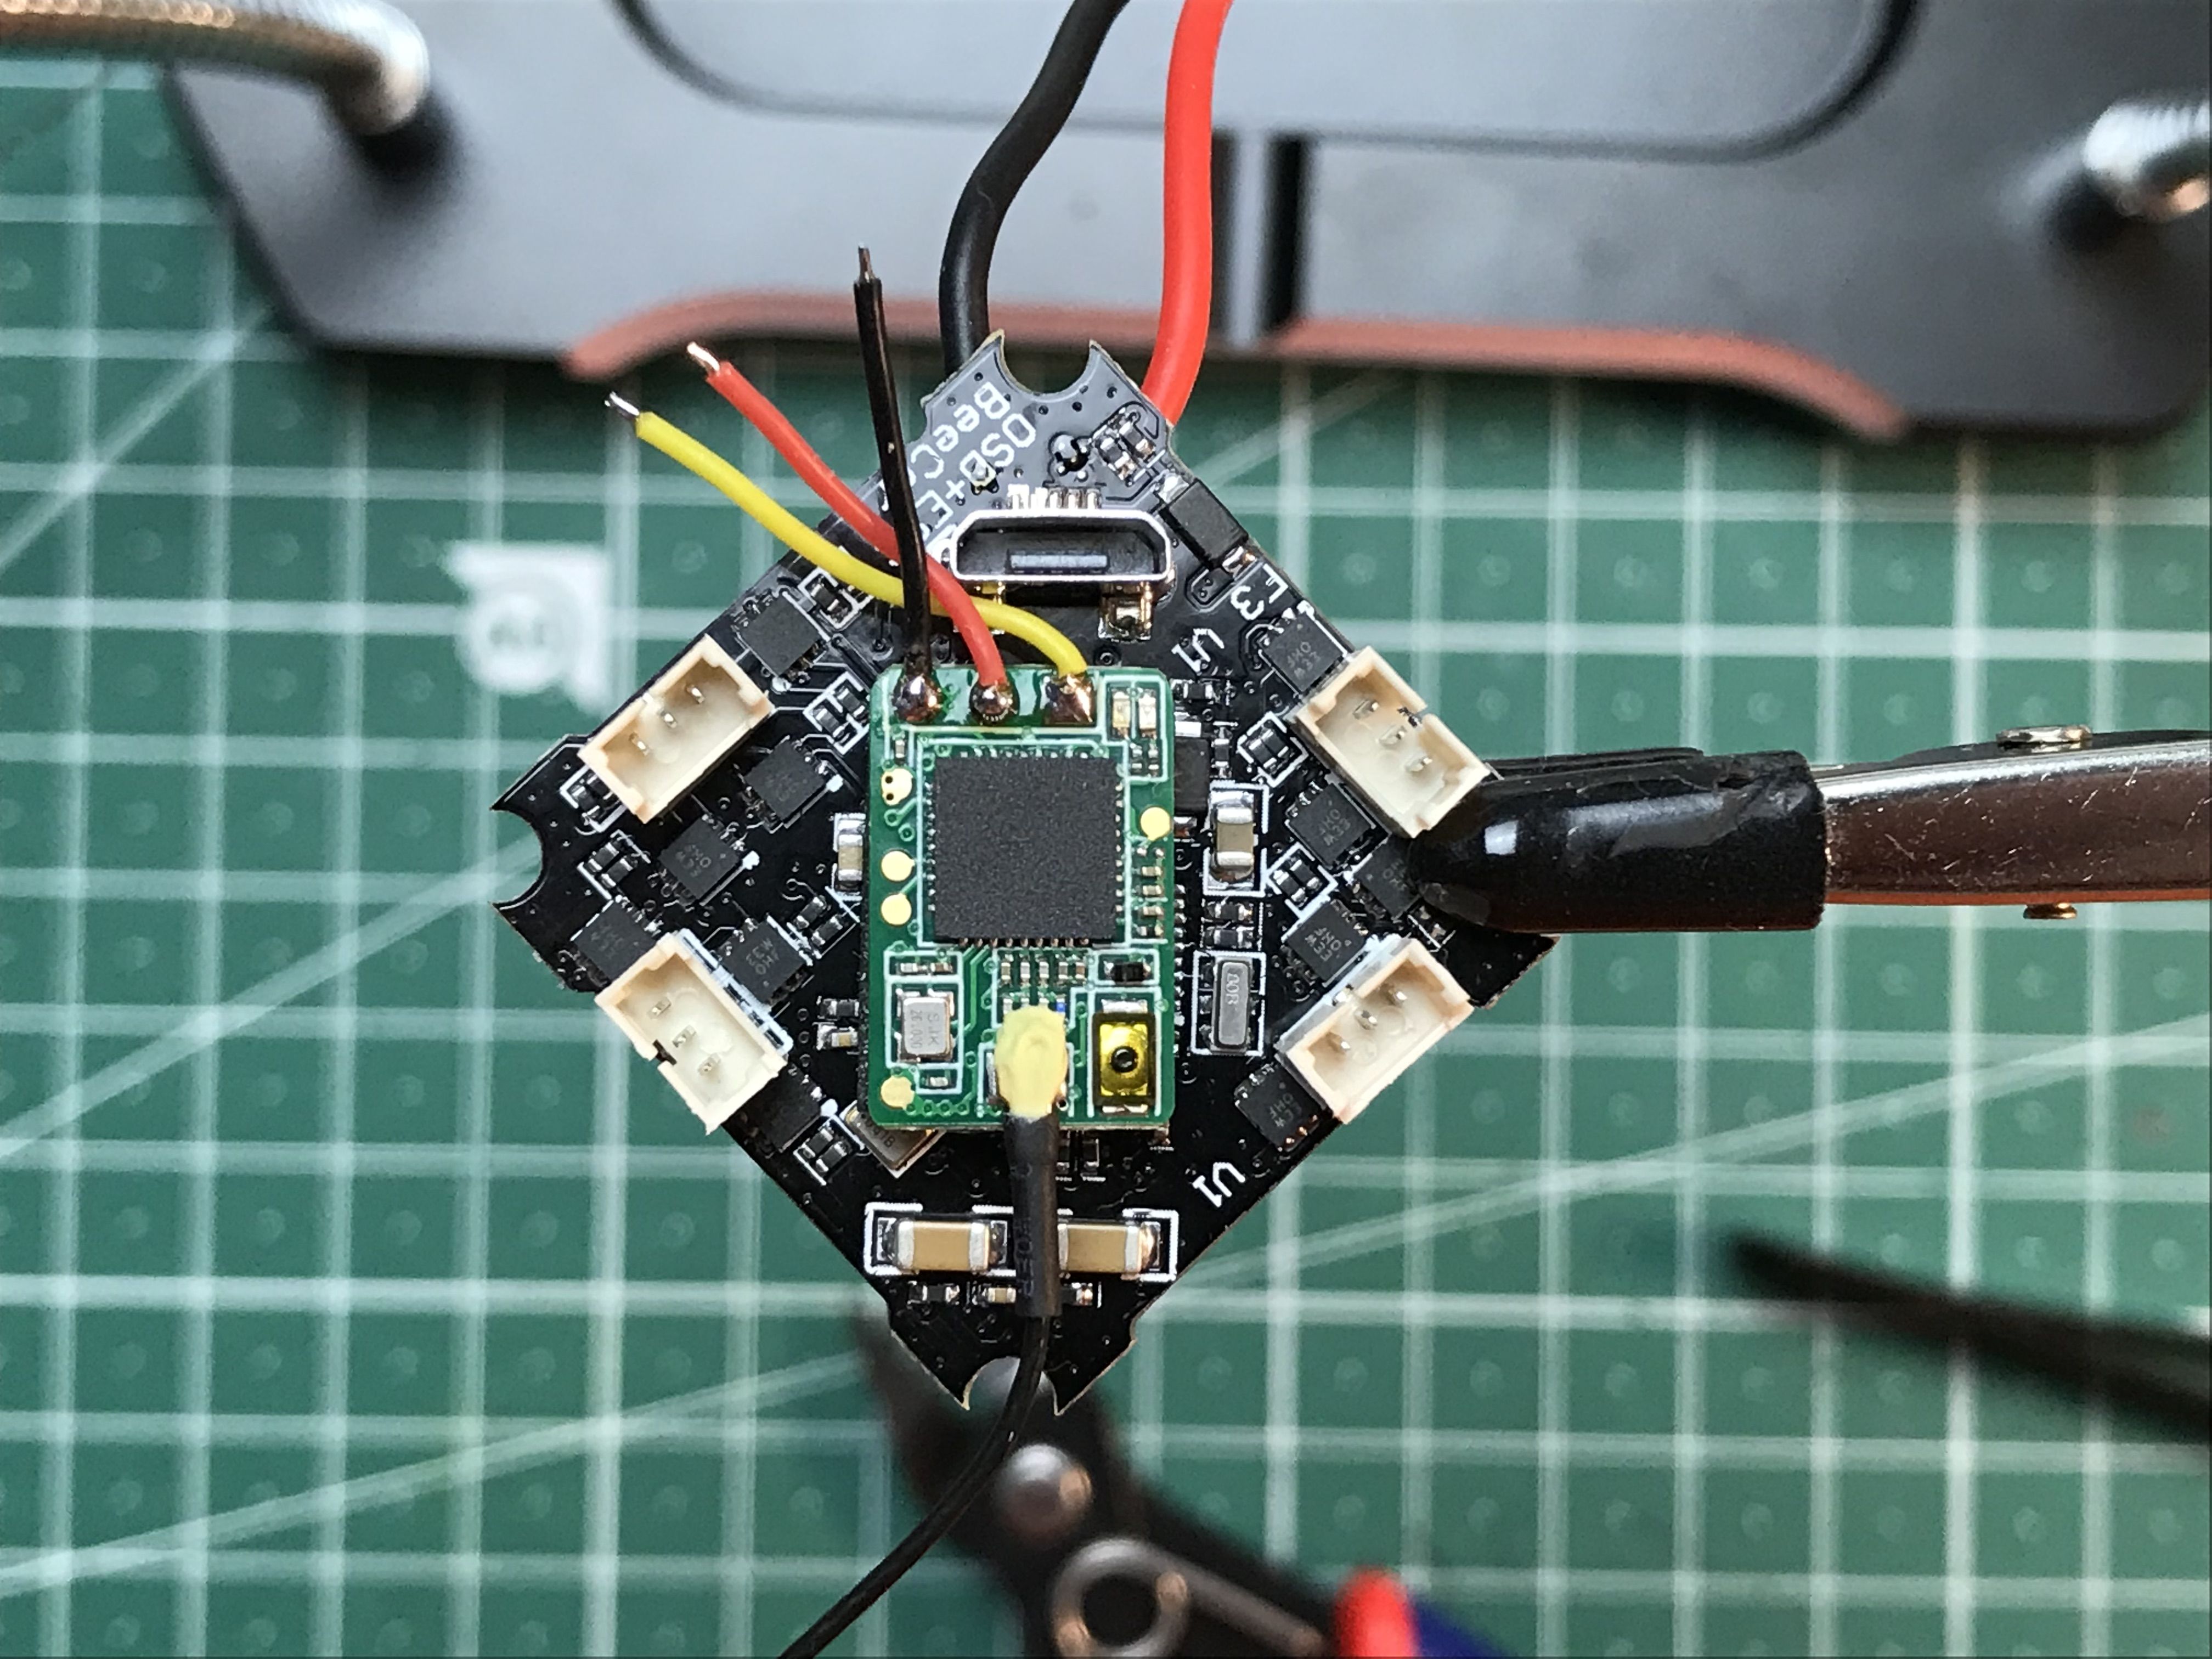 The receiver mounted on the flight controller